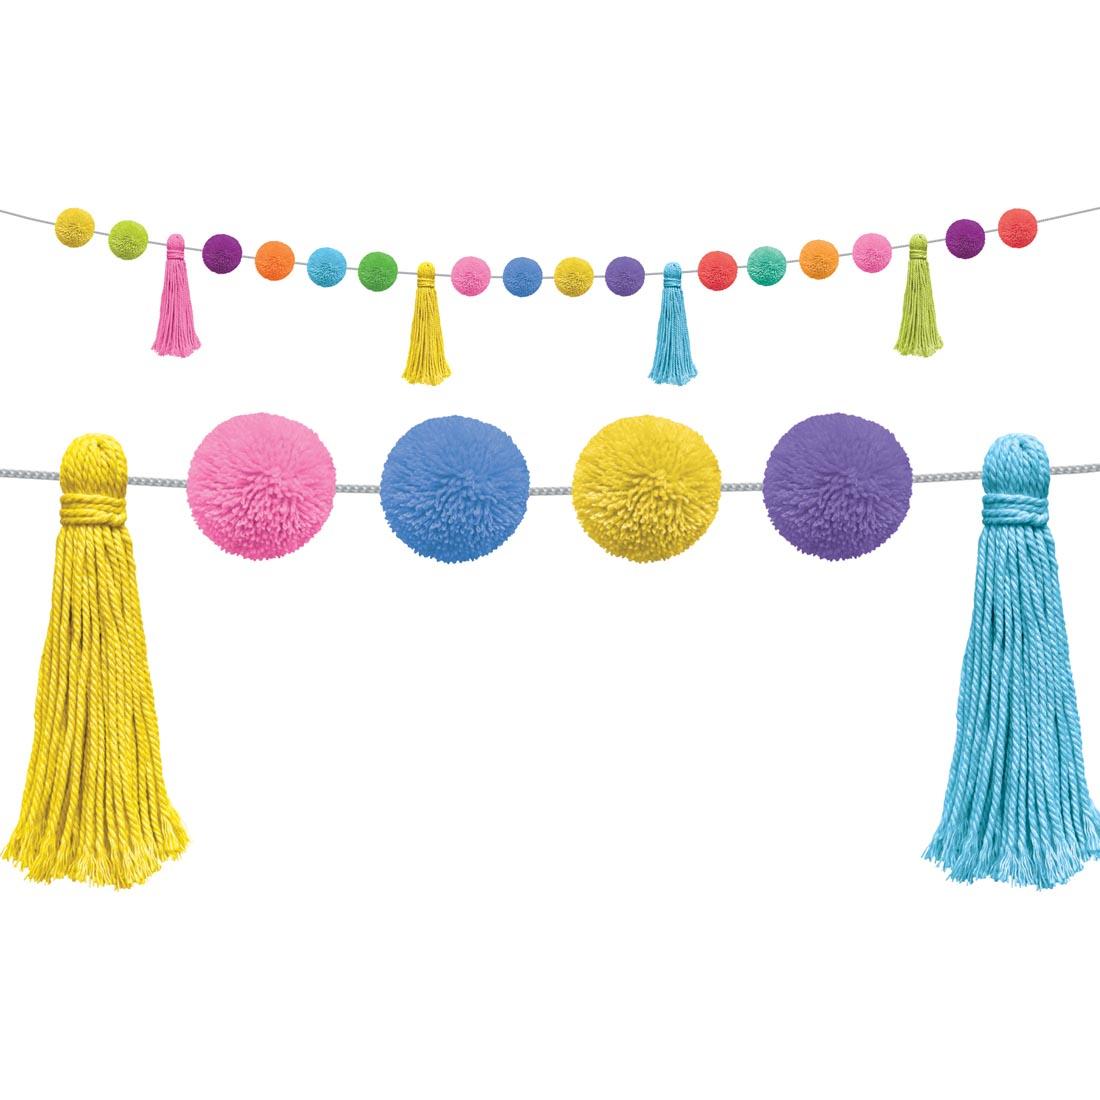 wide view plus a closeup of the Colorful Pom-Poms And Tassels Garland By Teacher Created Resources